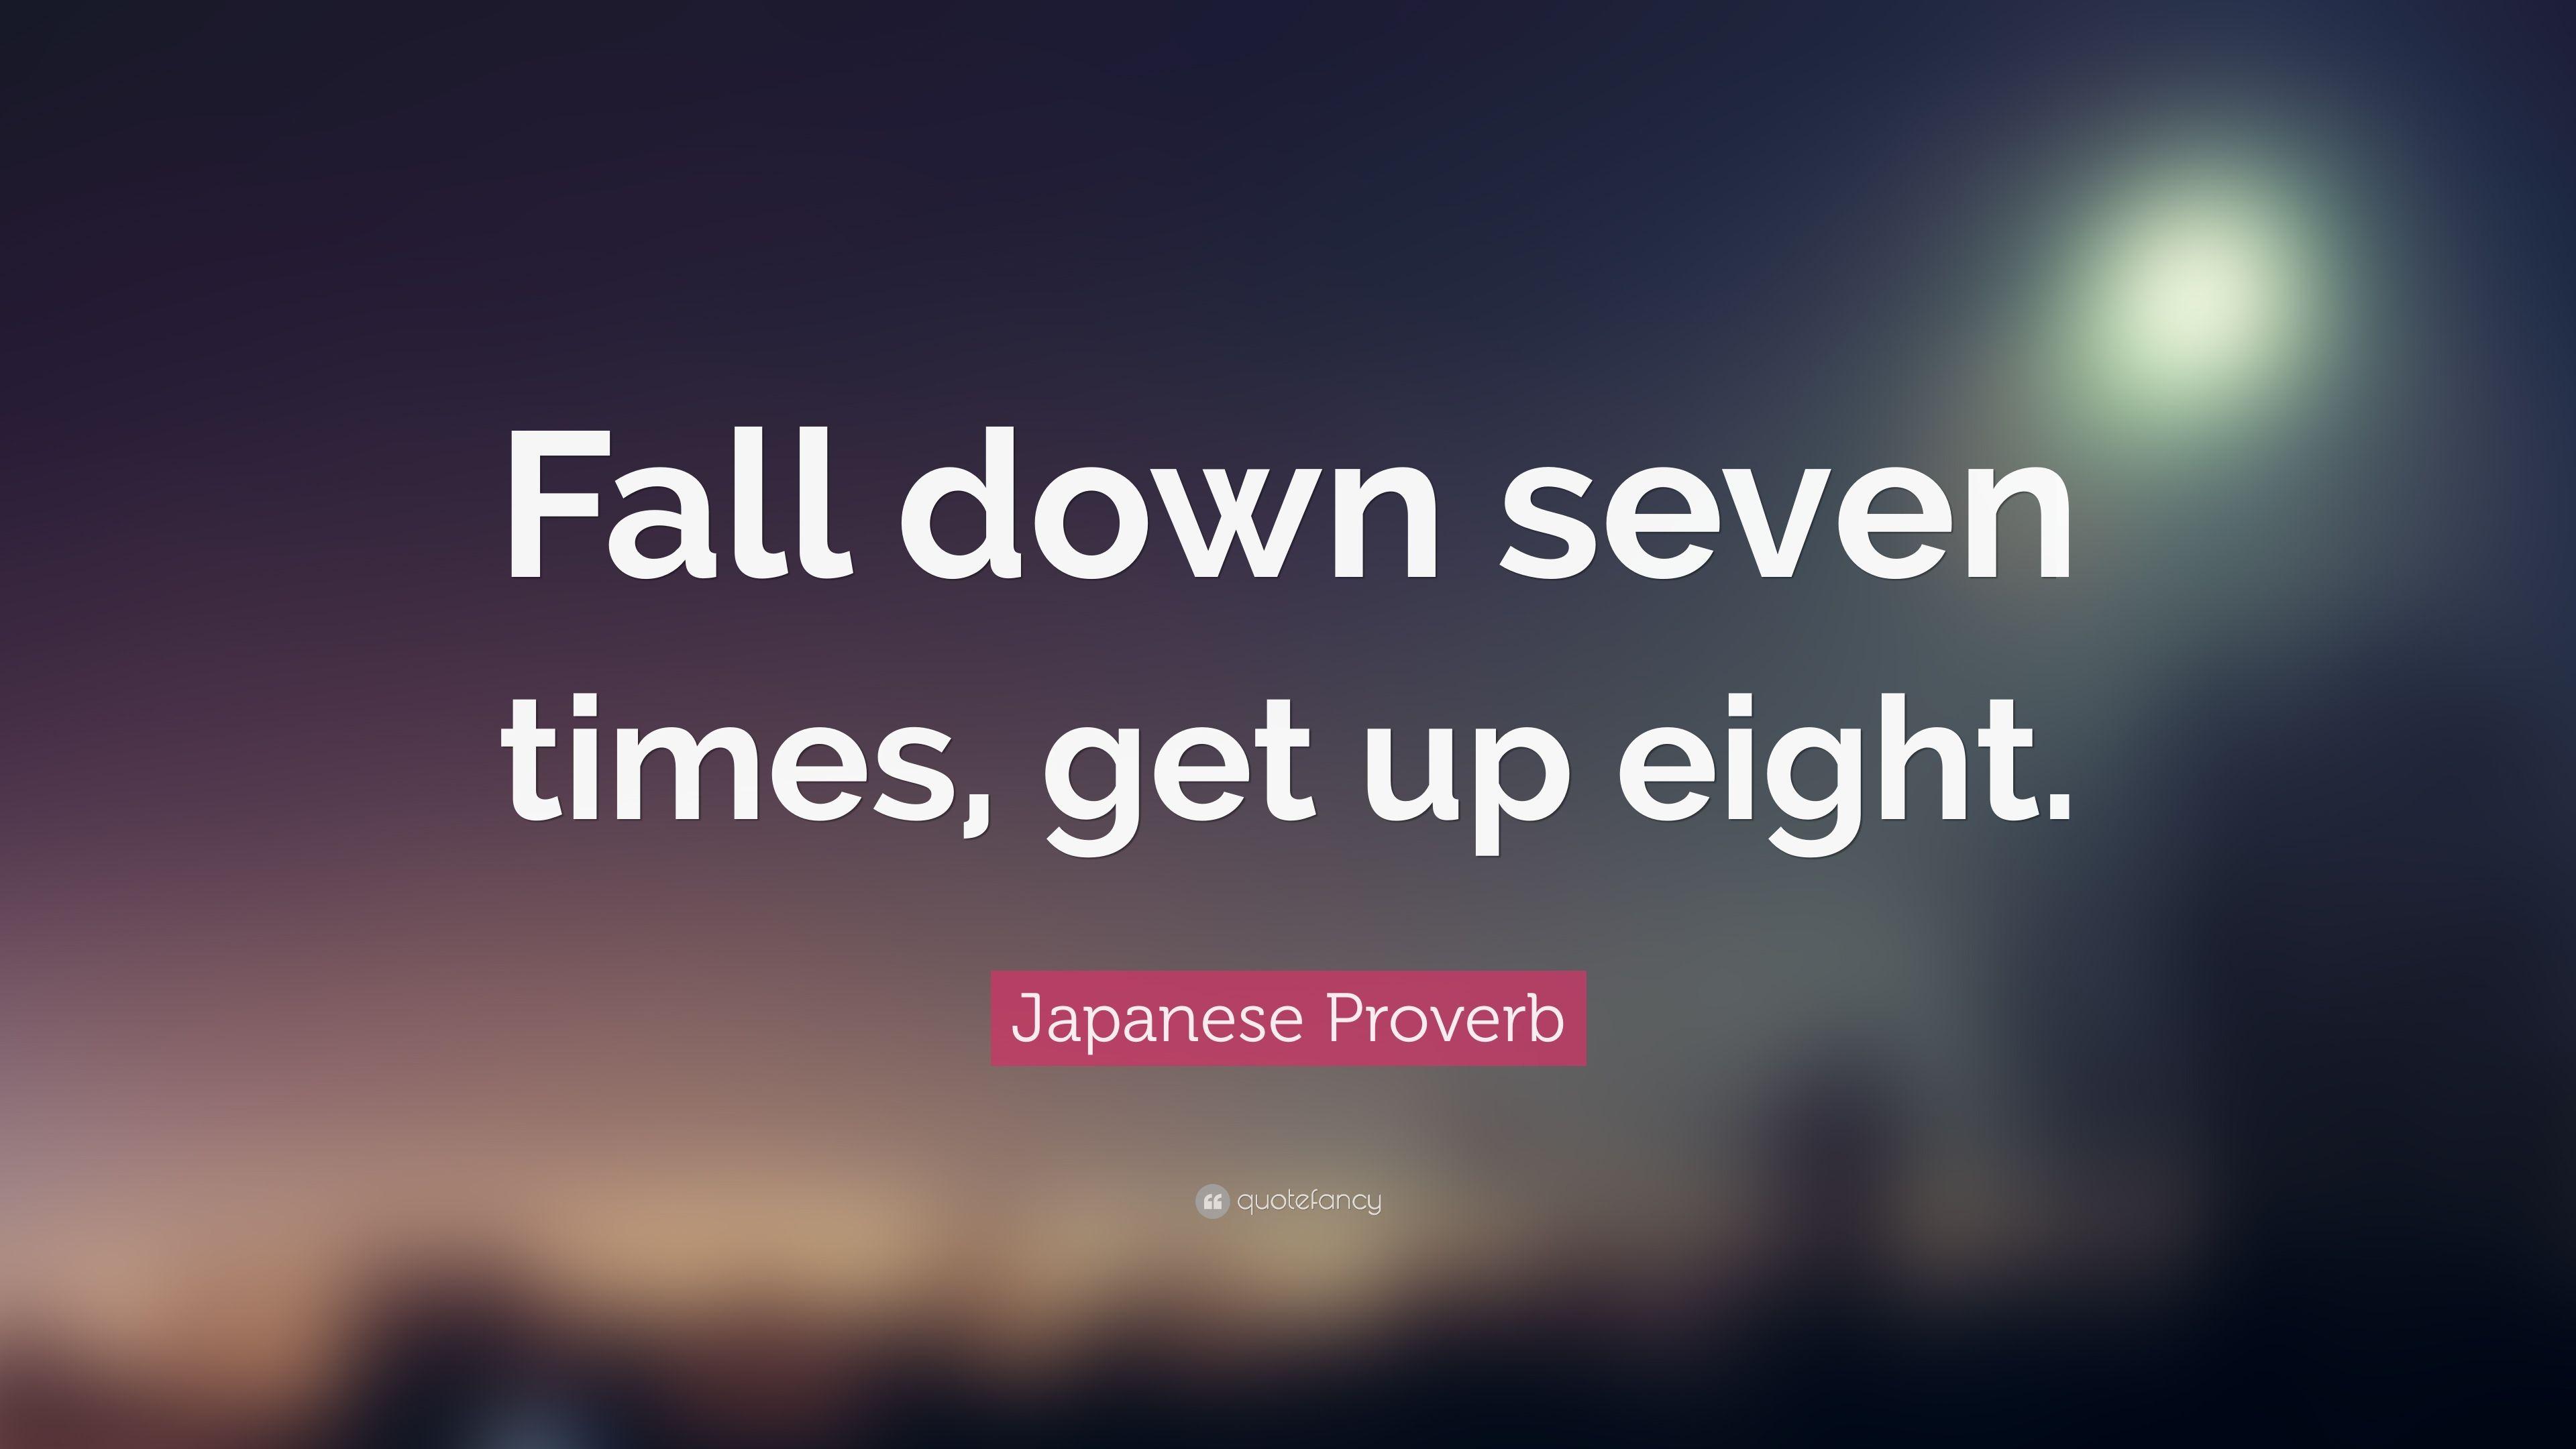 Japanese Proverb Quote: “Fall down seven times, get up eight.” 34